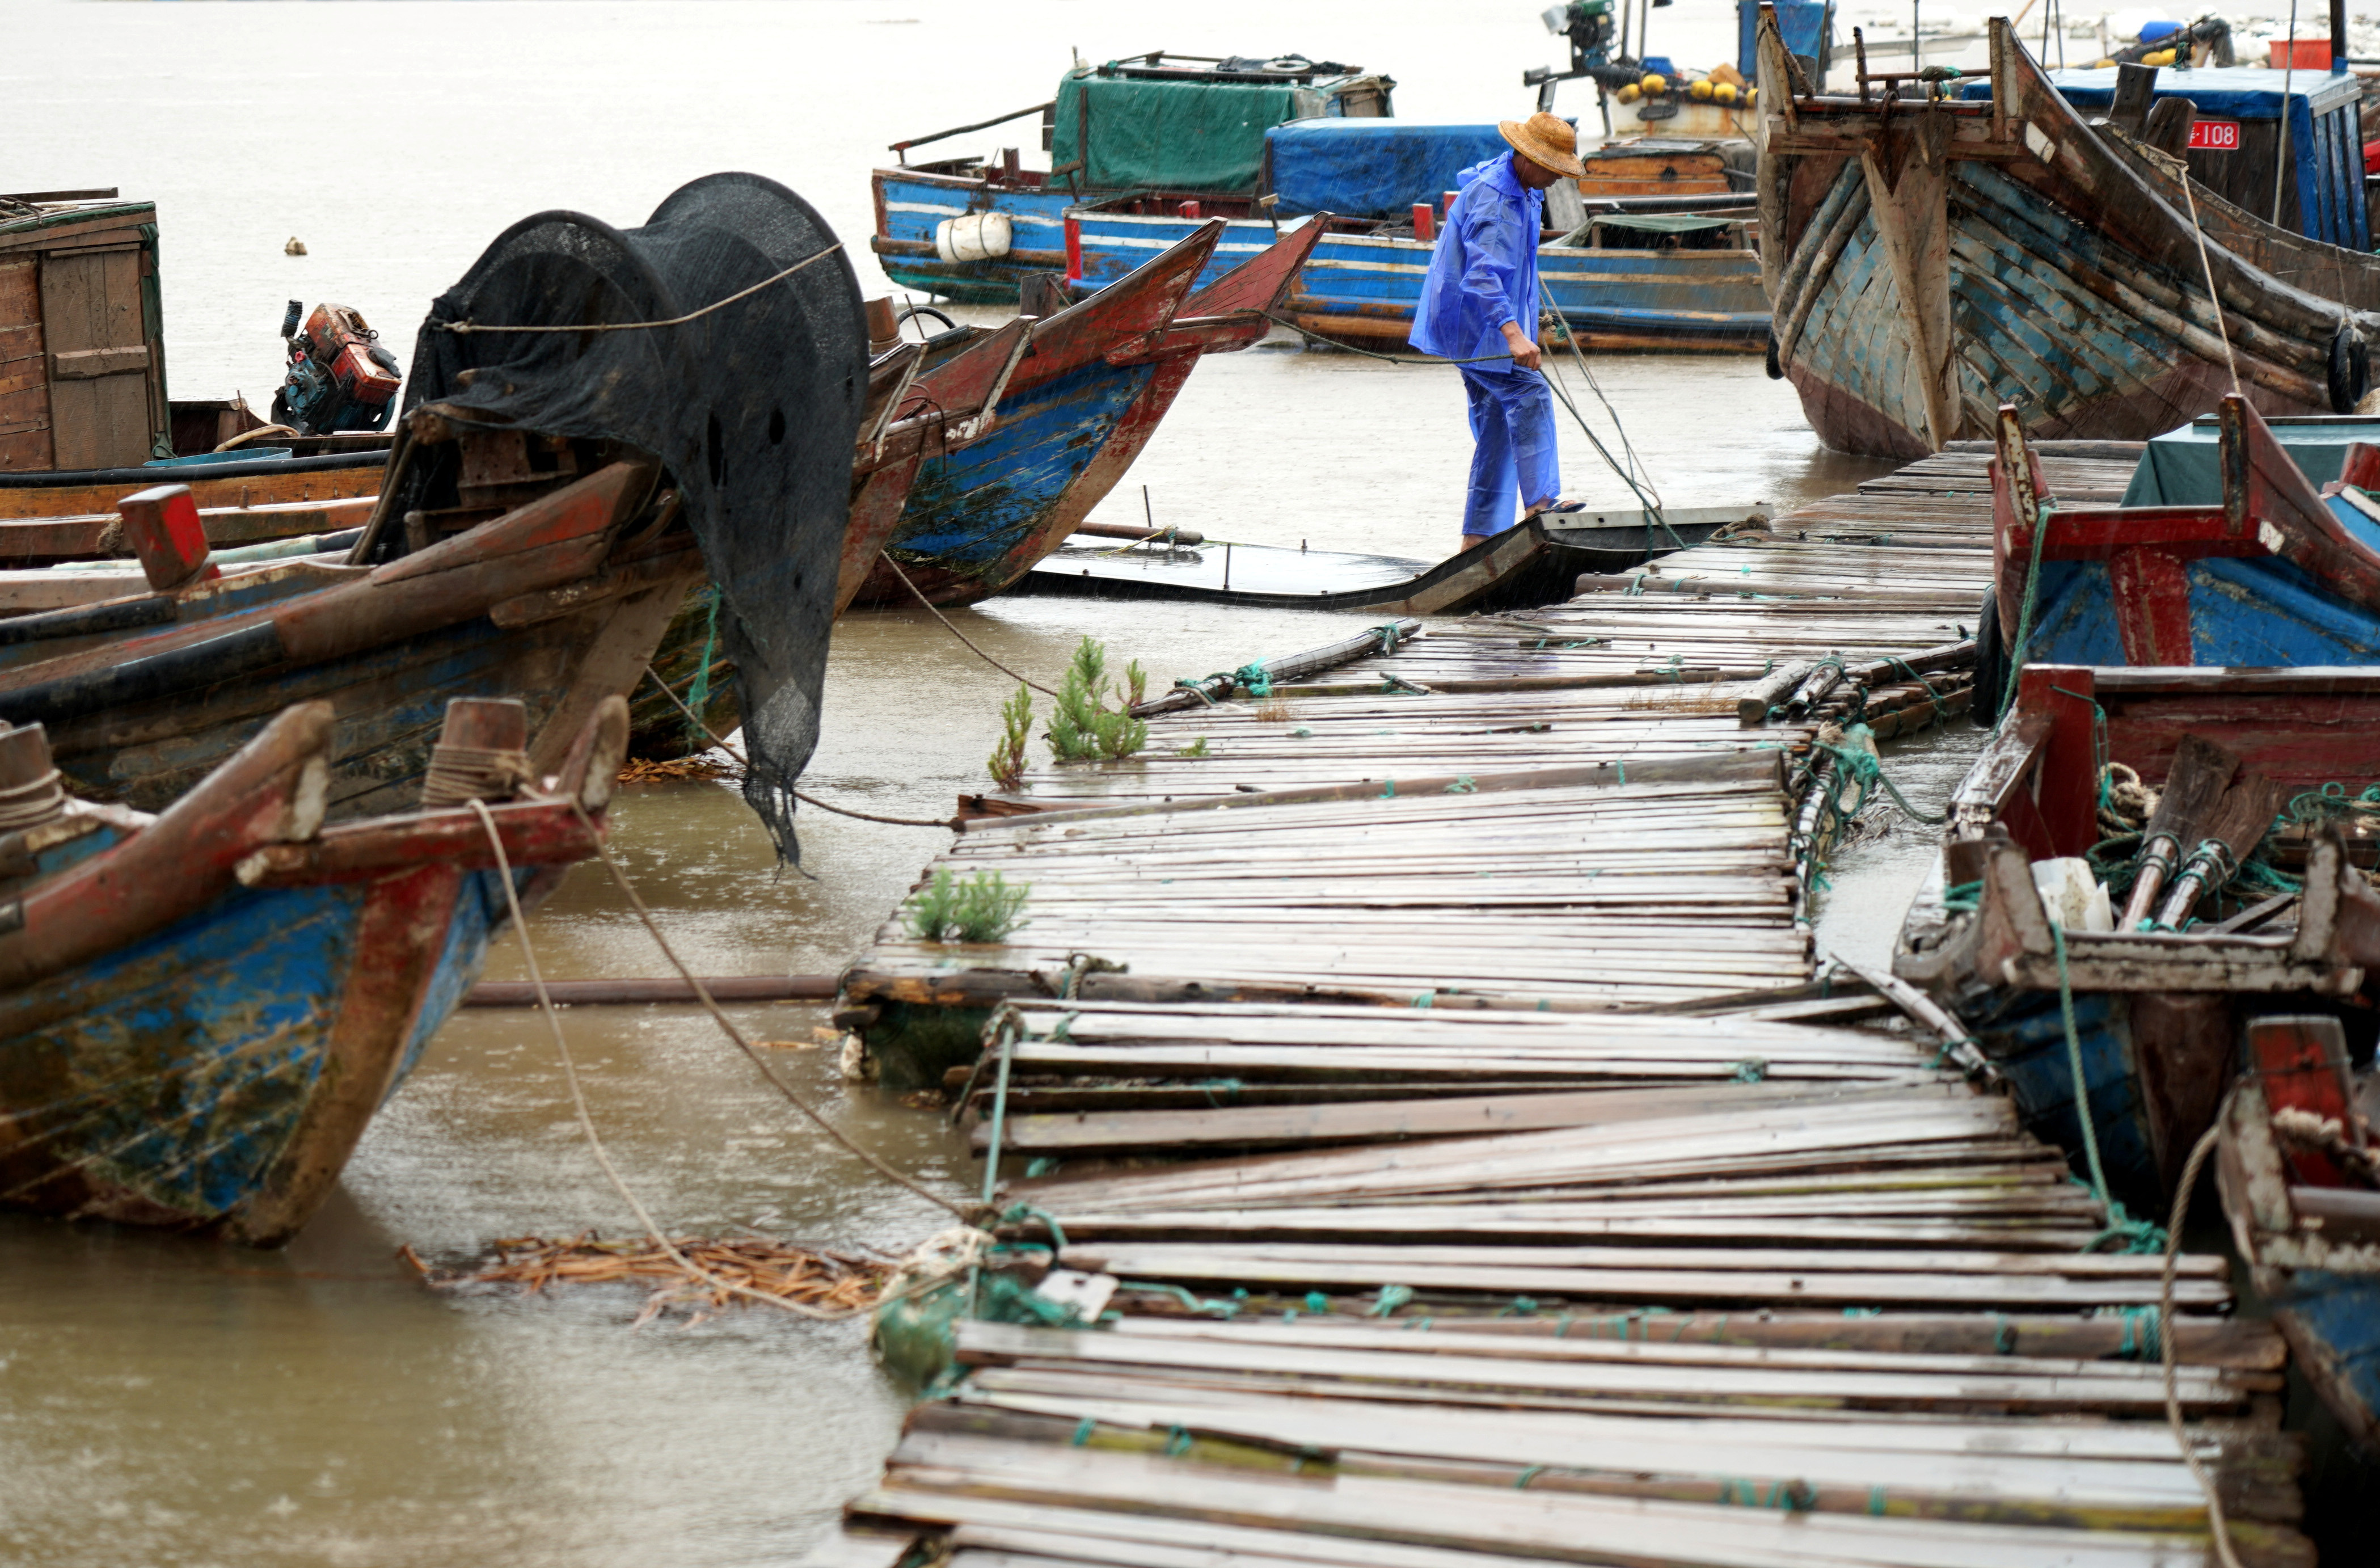 Man ties a boat to a pier as Typhoon Muifa approaches, at Yueqing bay in Wenzhou